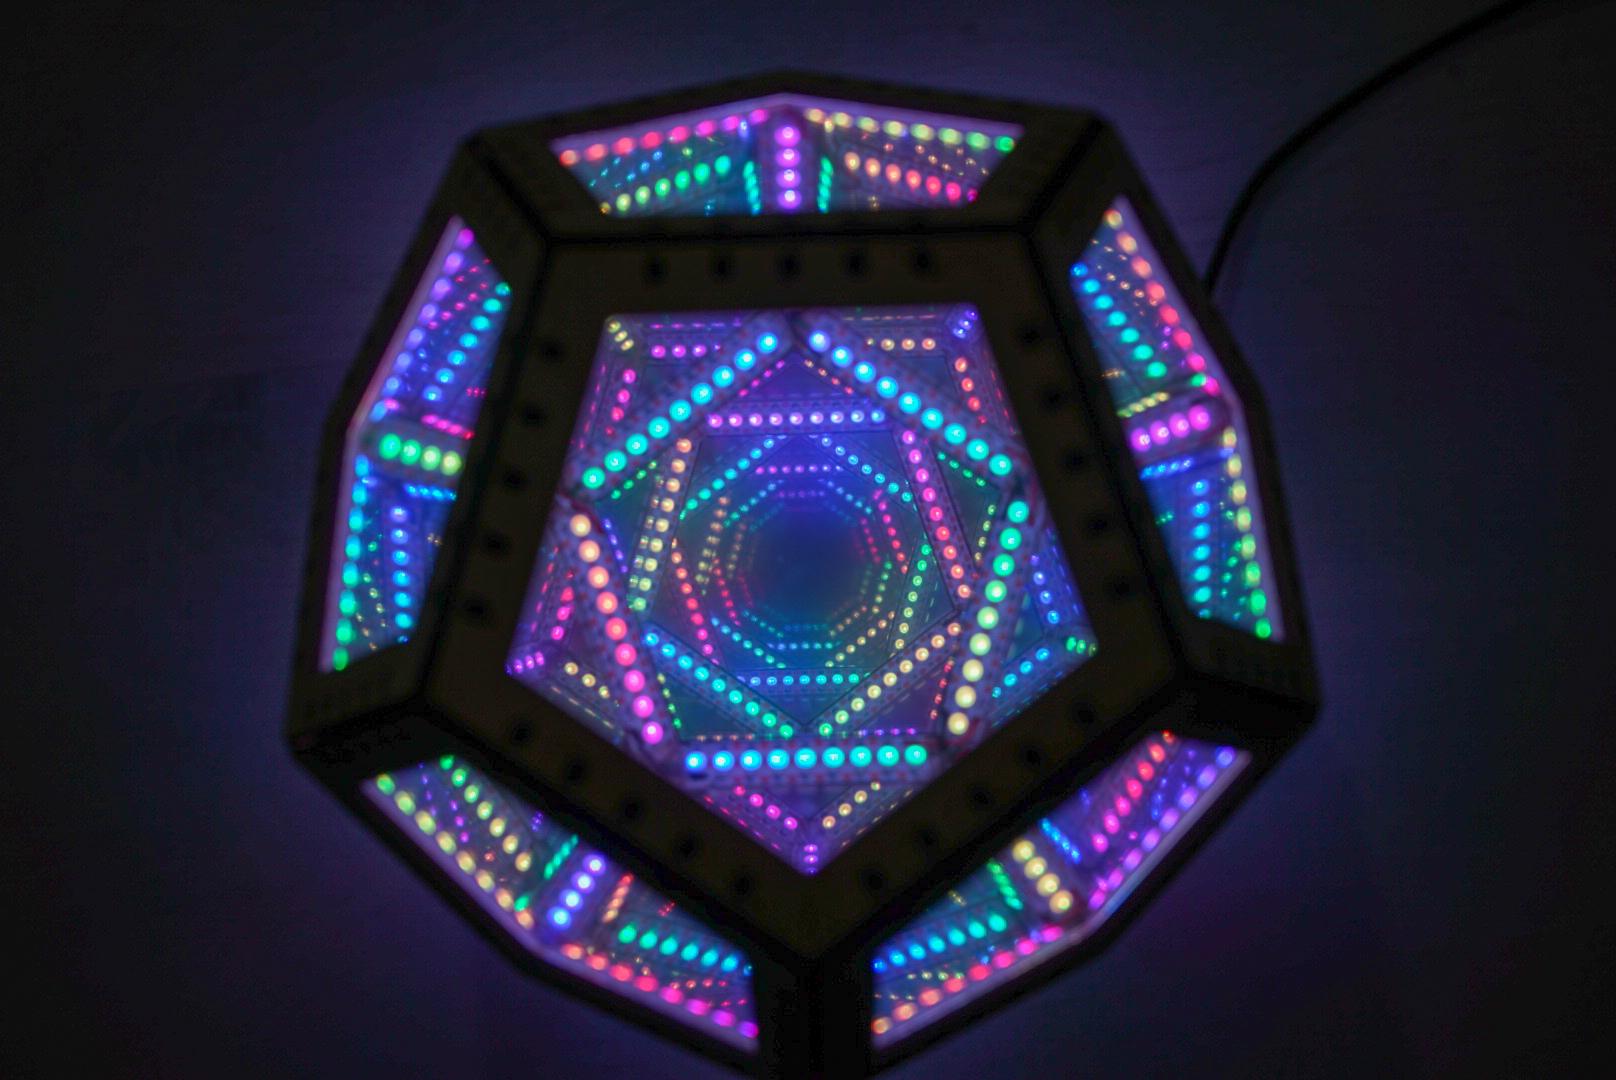 Infinity dodecahedron puts on a mesmerizing light show